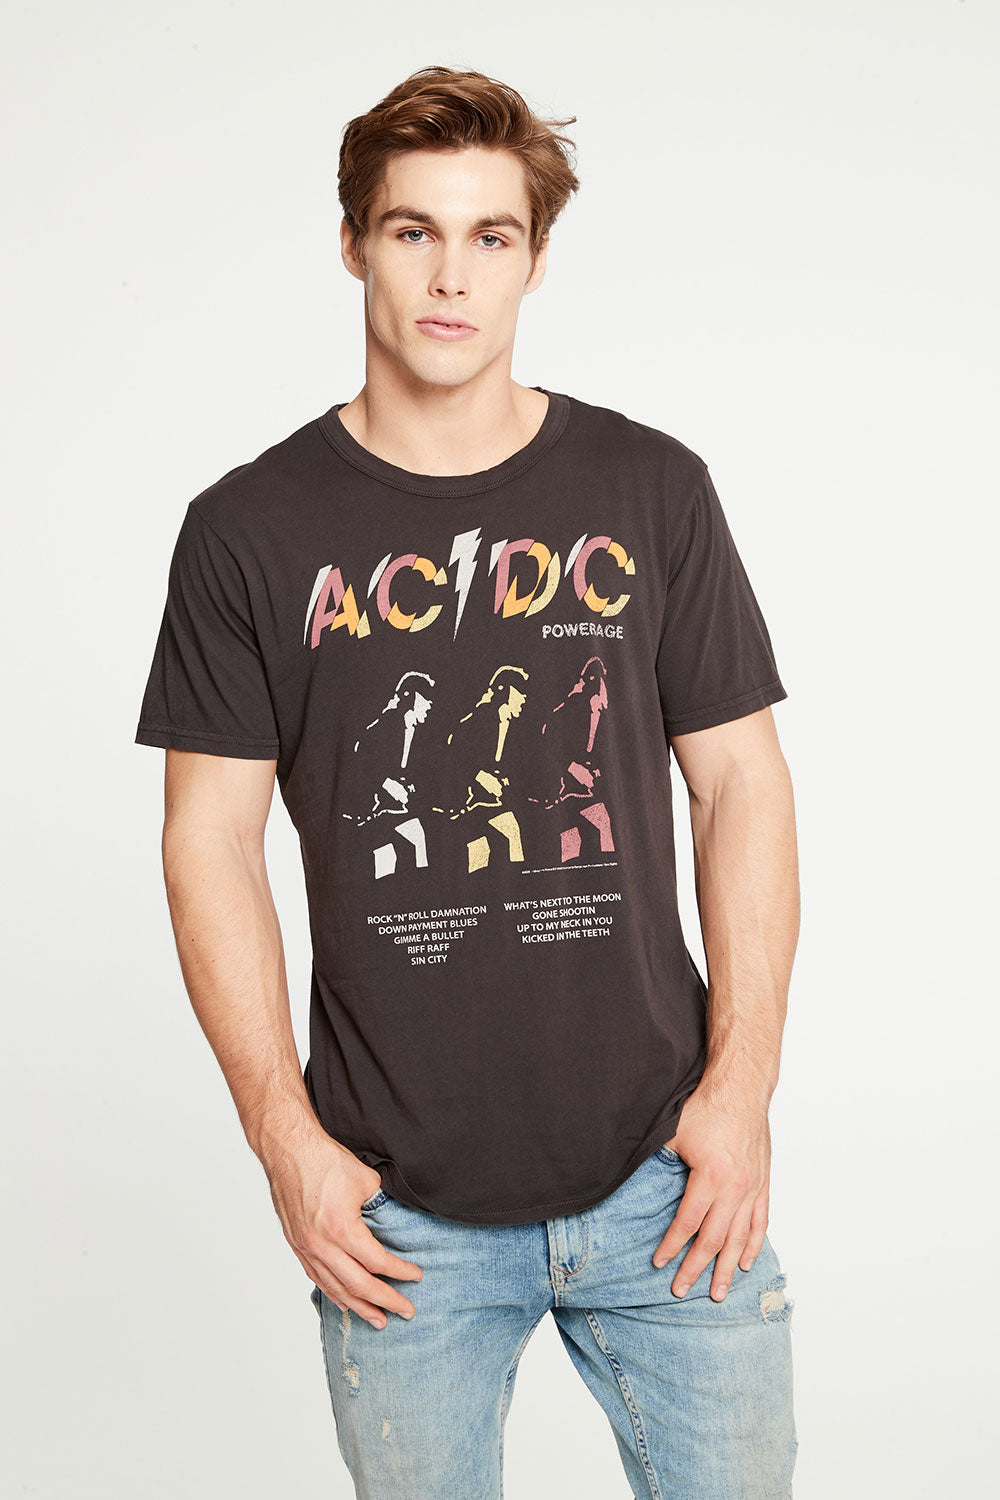 AC/DC - Powerage MENS - chaserbrand